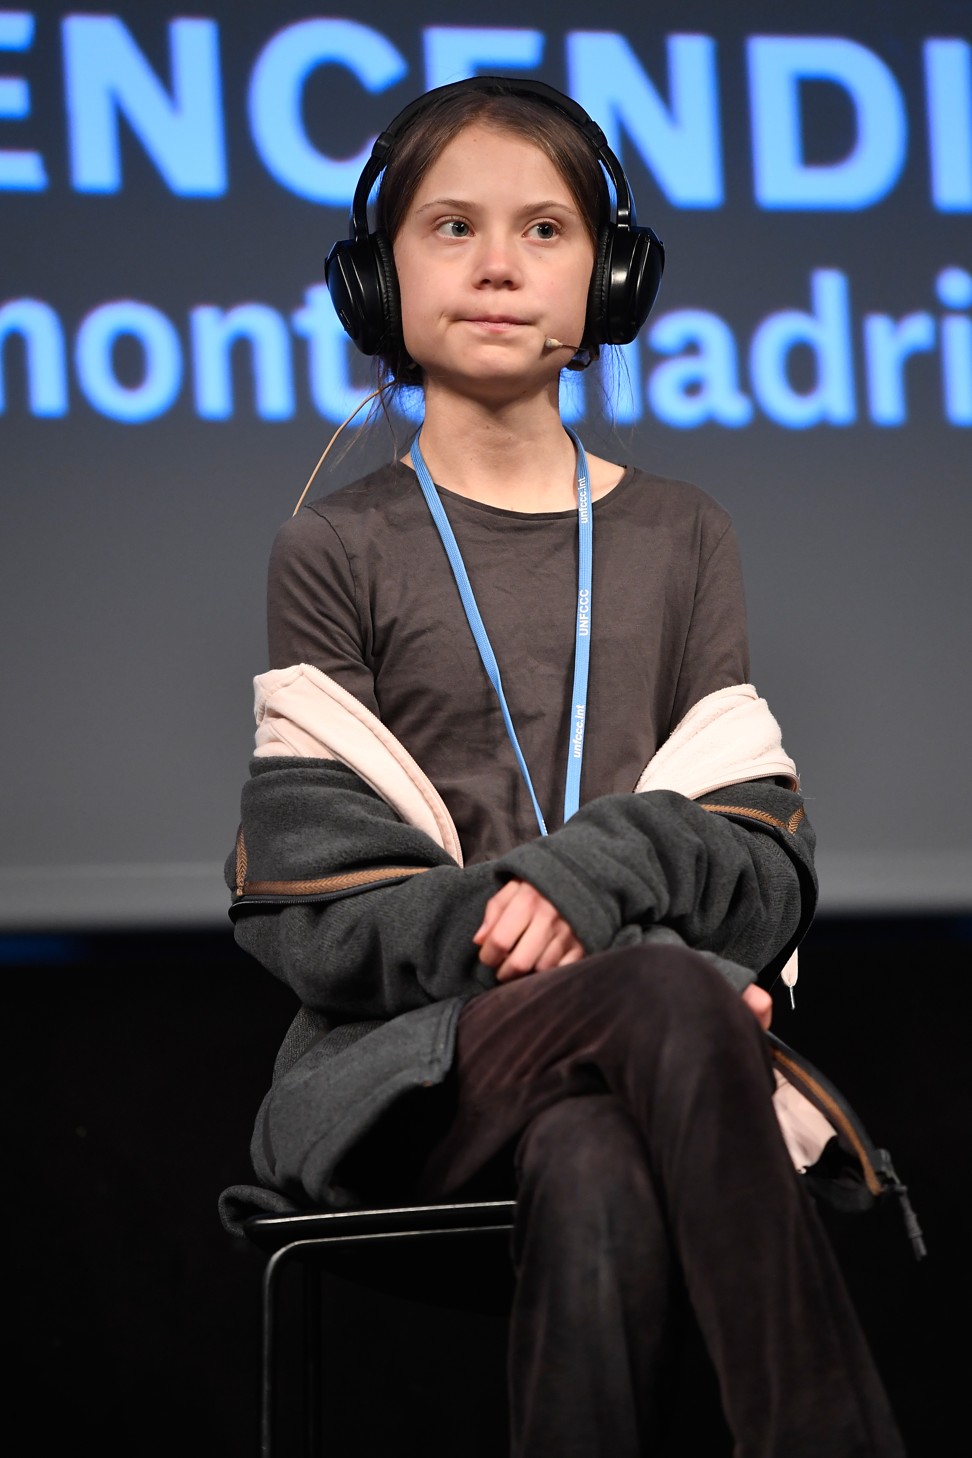 Swedish climate activist Greta Thunberg will attend the COP26 summit in Glasgow, the UK. Photo: AFP